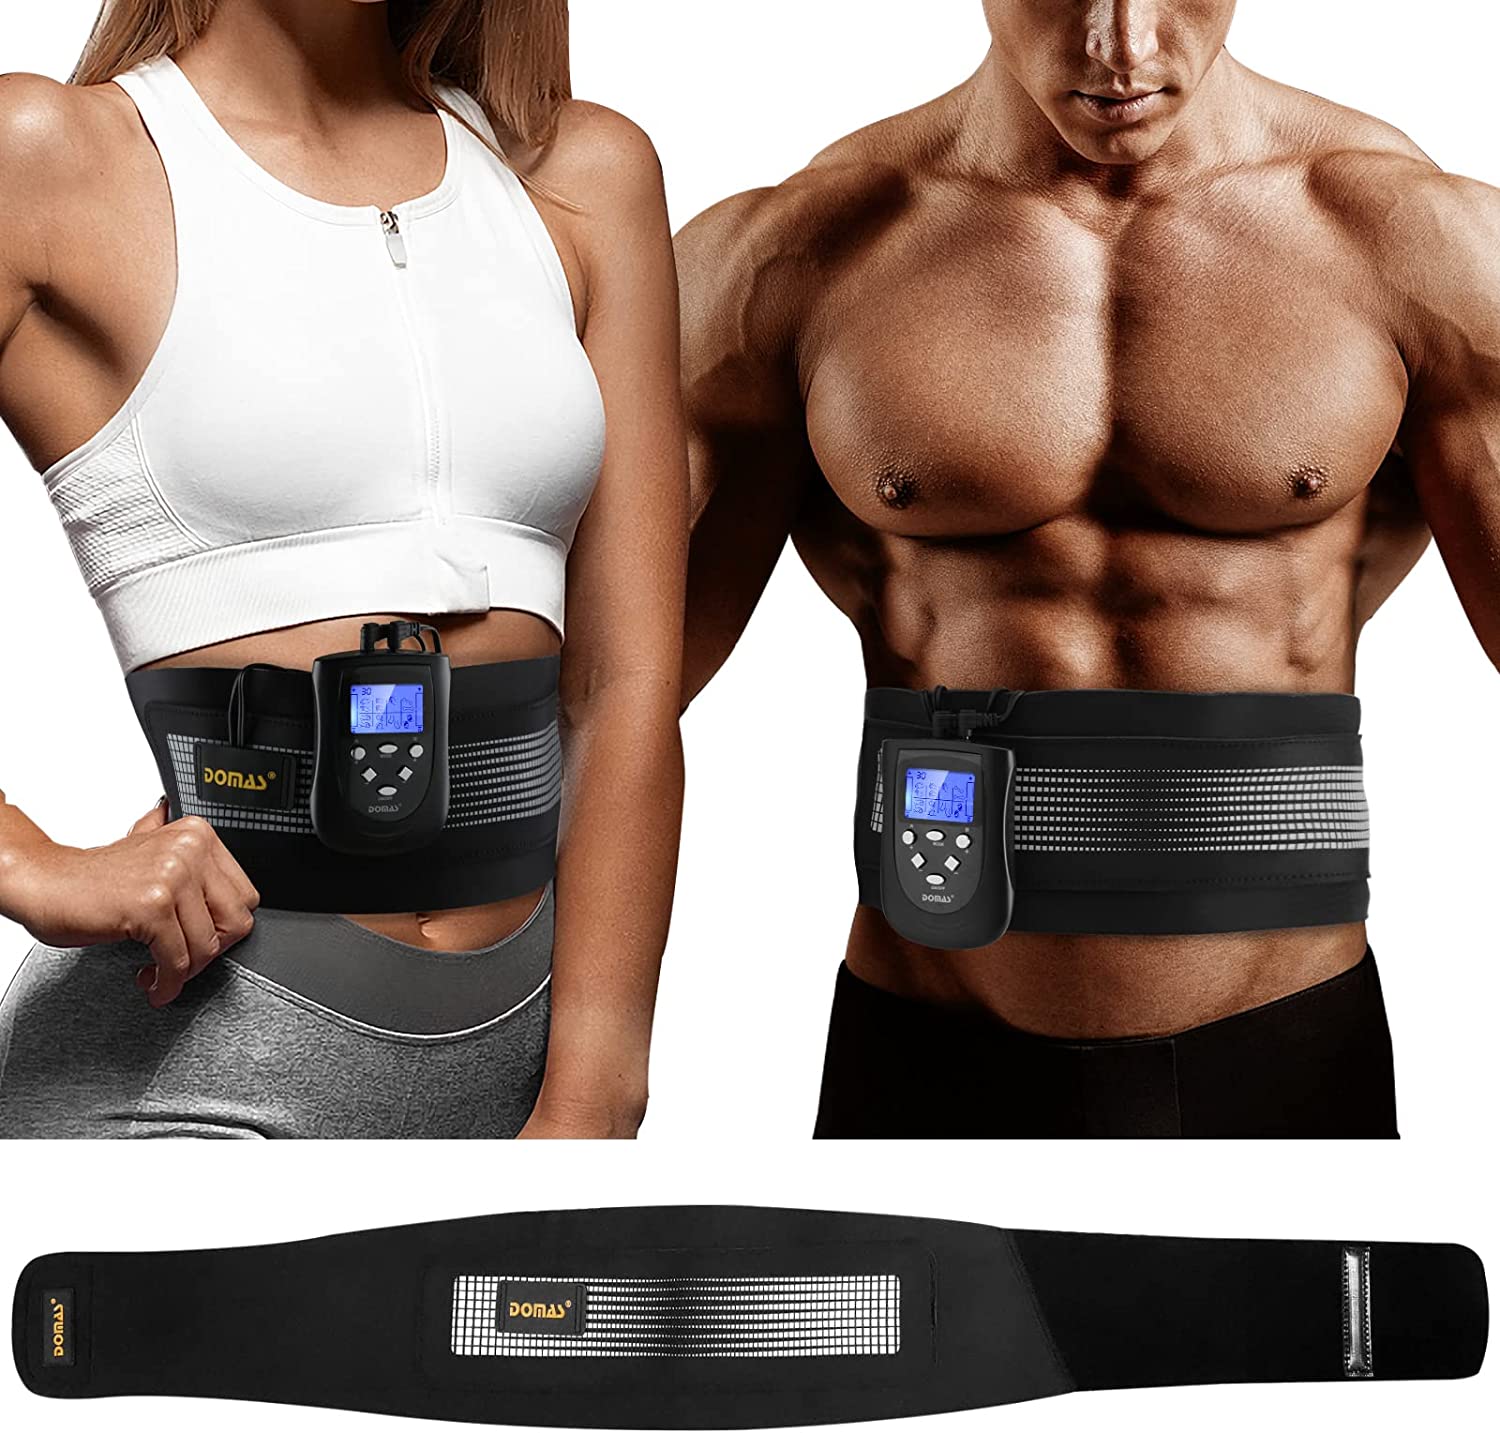 VibeX ™ Abdominal Muscle Trainer Ab Toning Belt, Muscle Toner